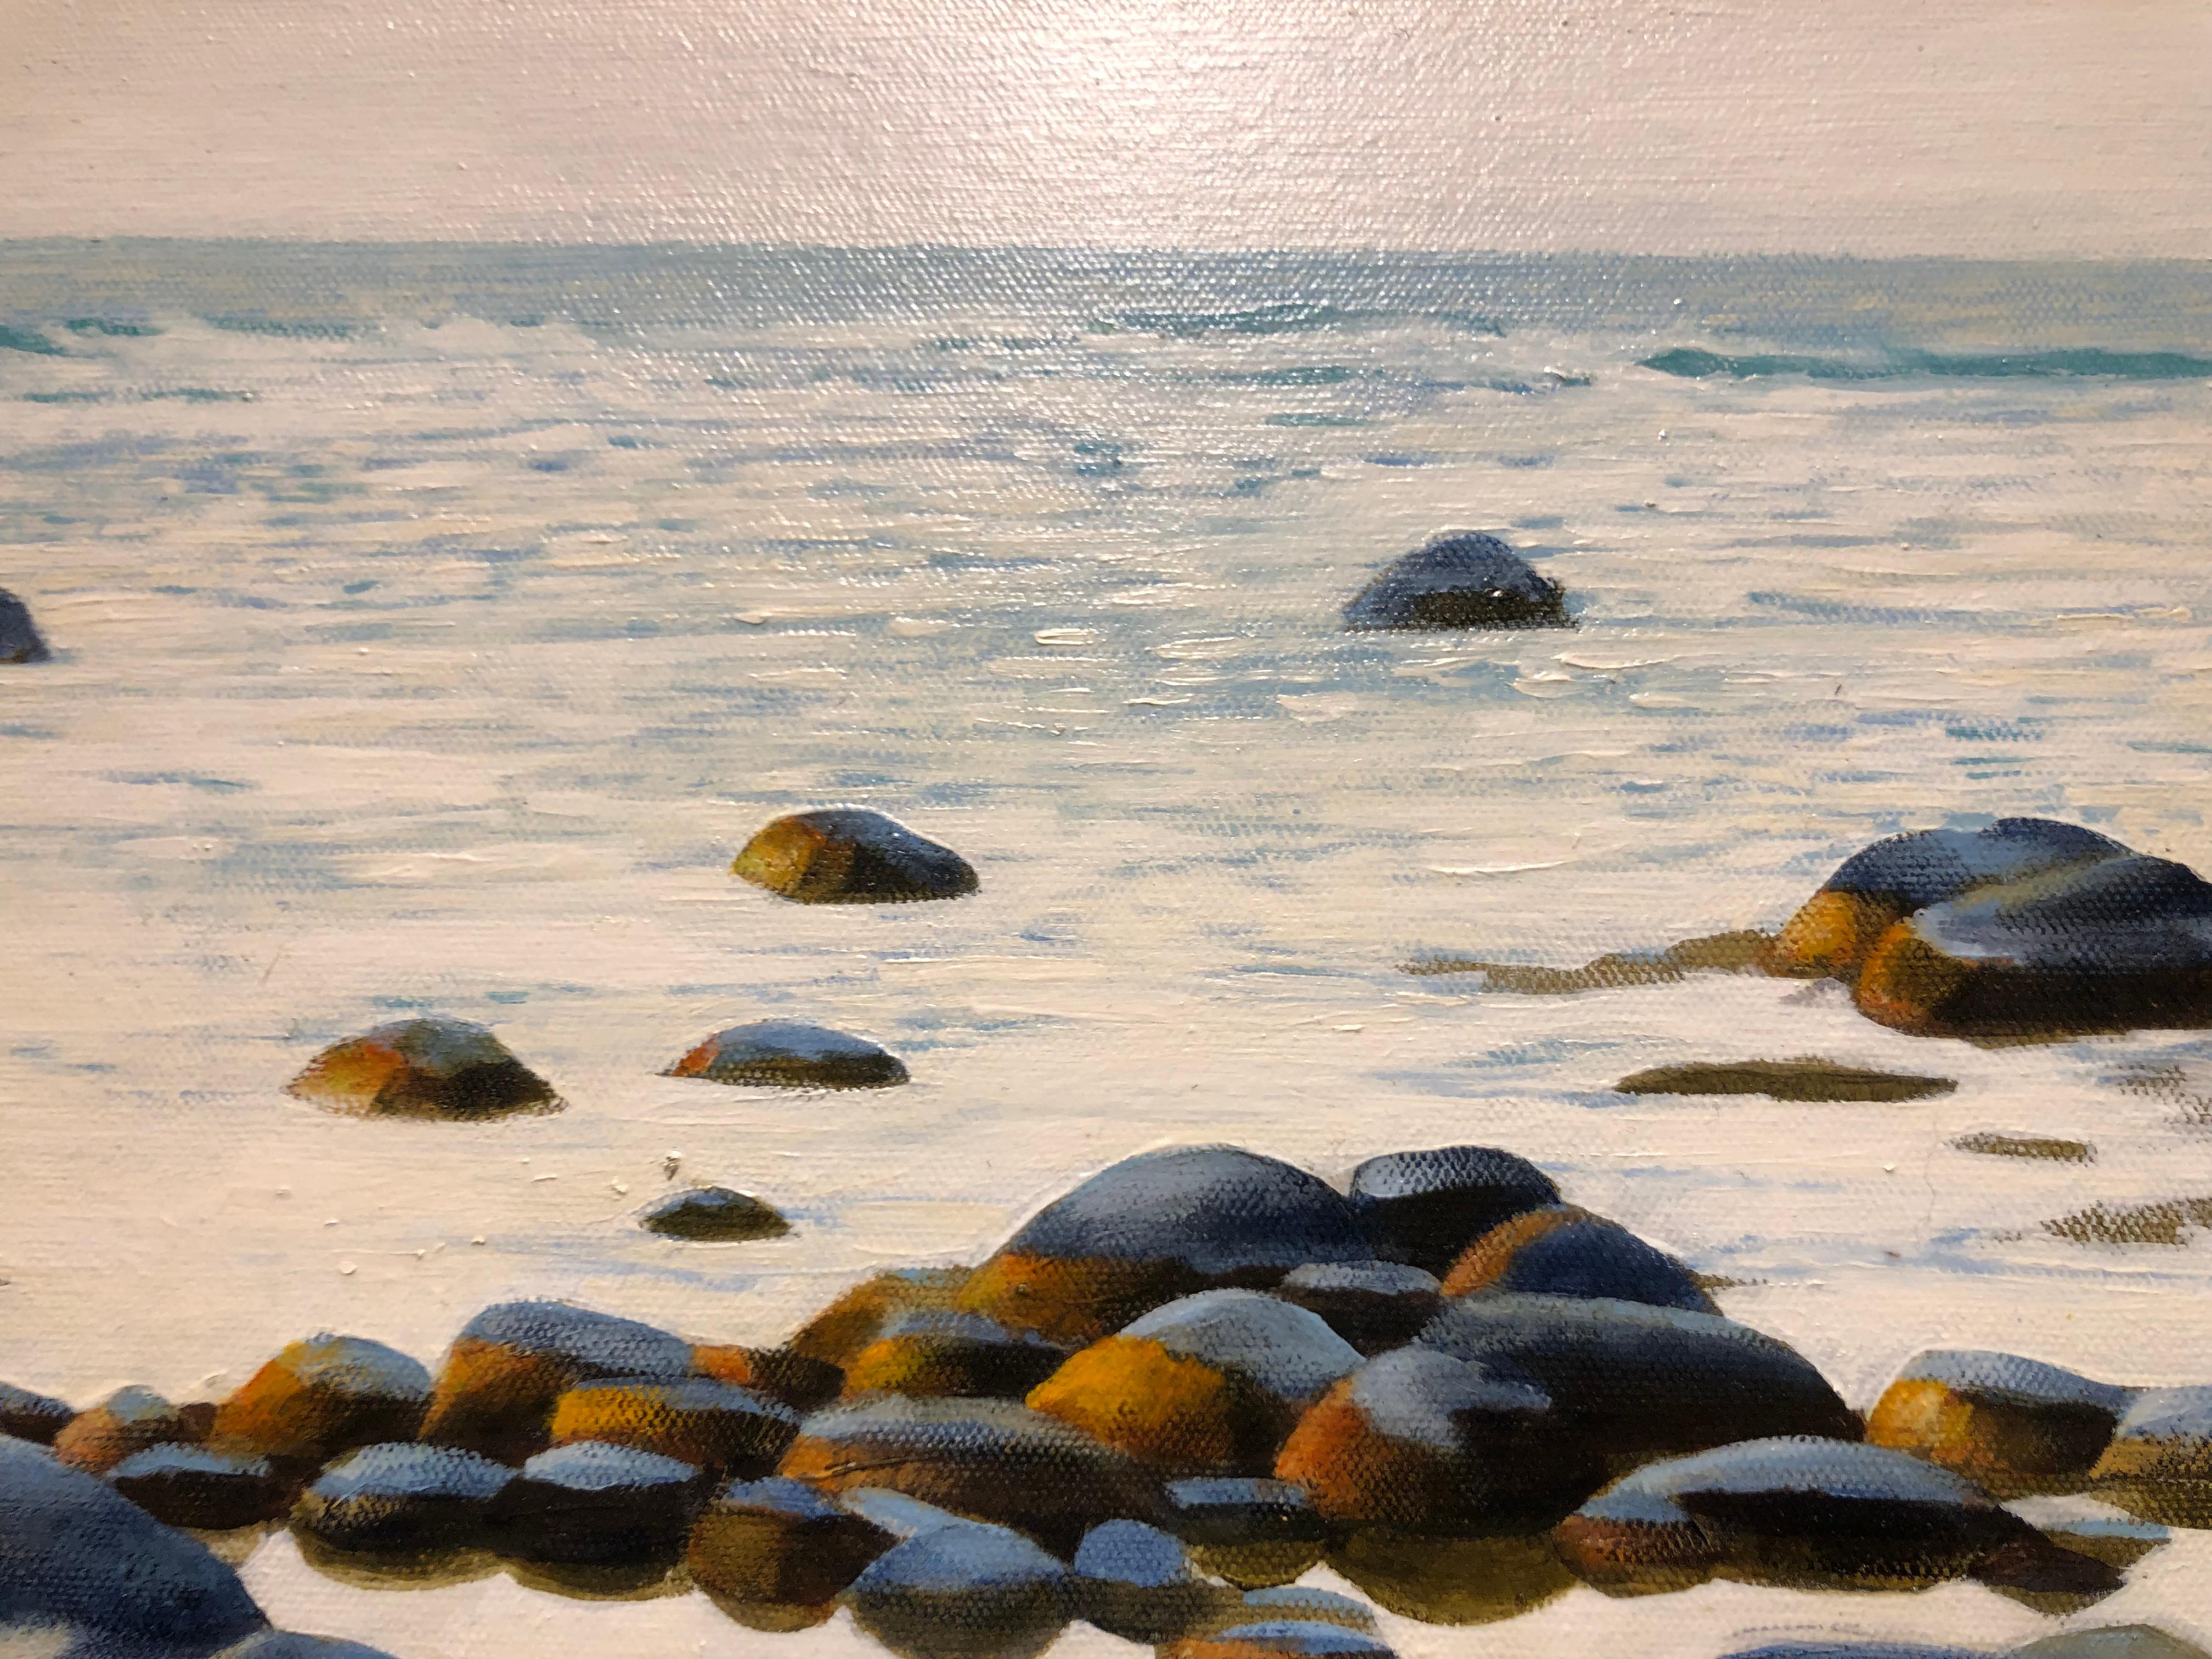 Song of Stones, Rocky Beach of Northern Michigan, Original Oil on Canvas 5